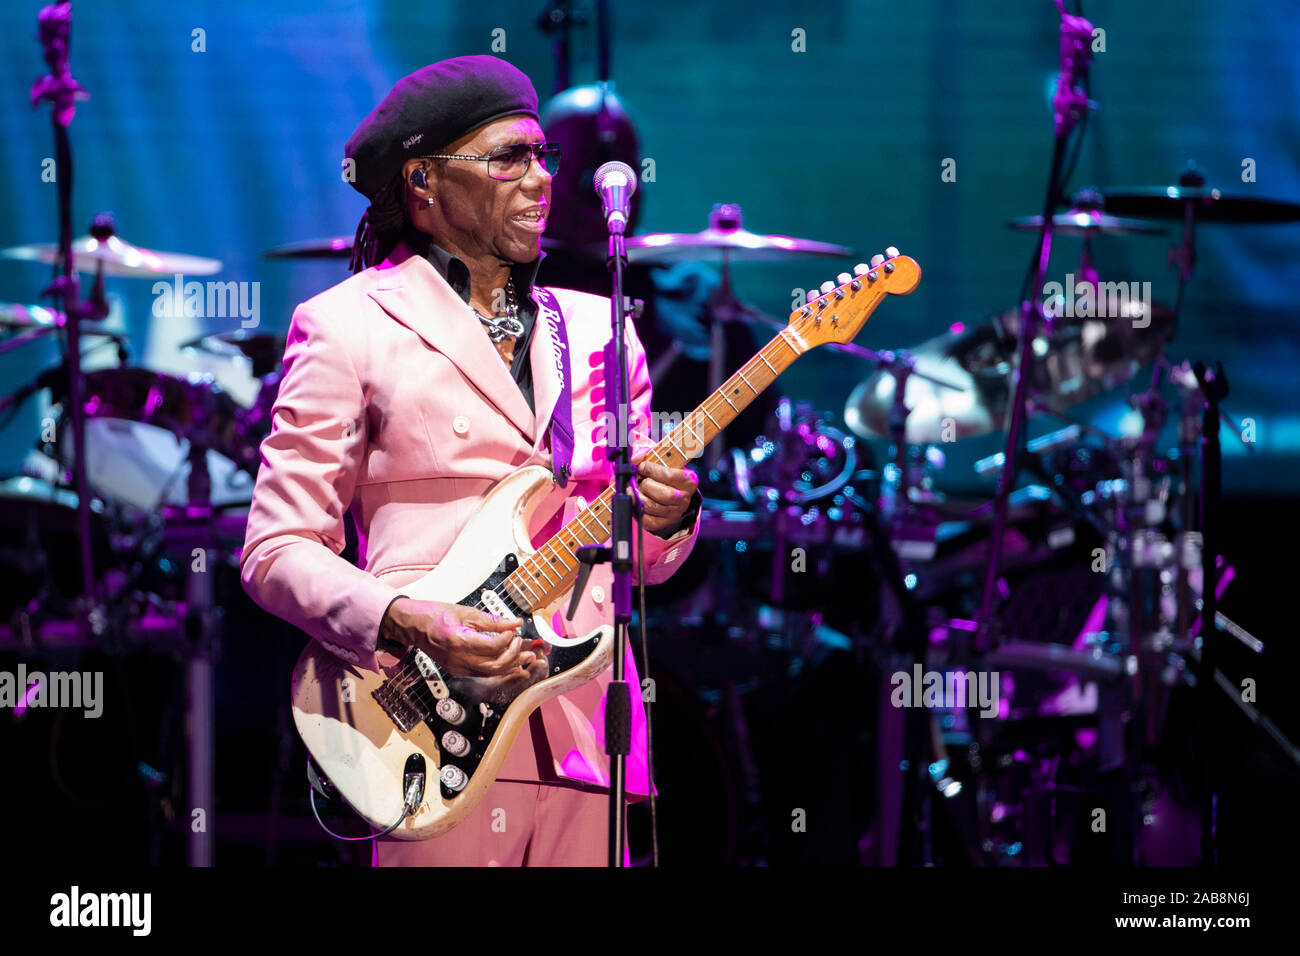 Nile Rodgers & Chic in concert at the Nice Jazz Festival on July 16, 2019. Stock Photo